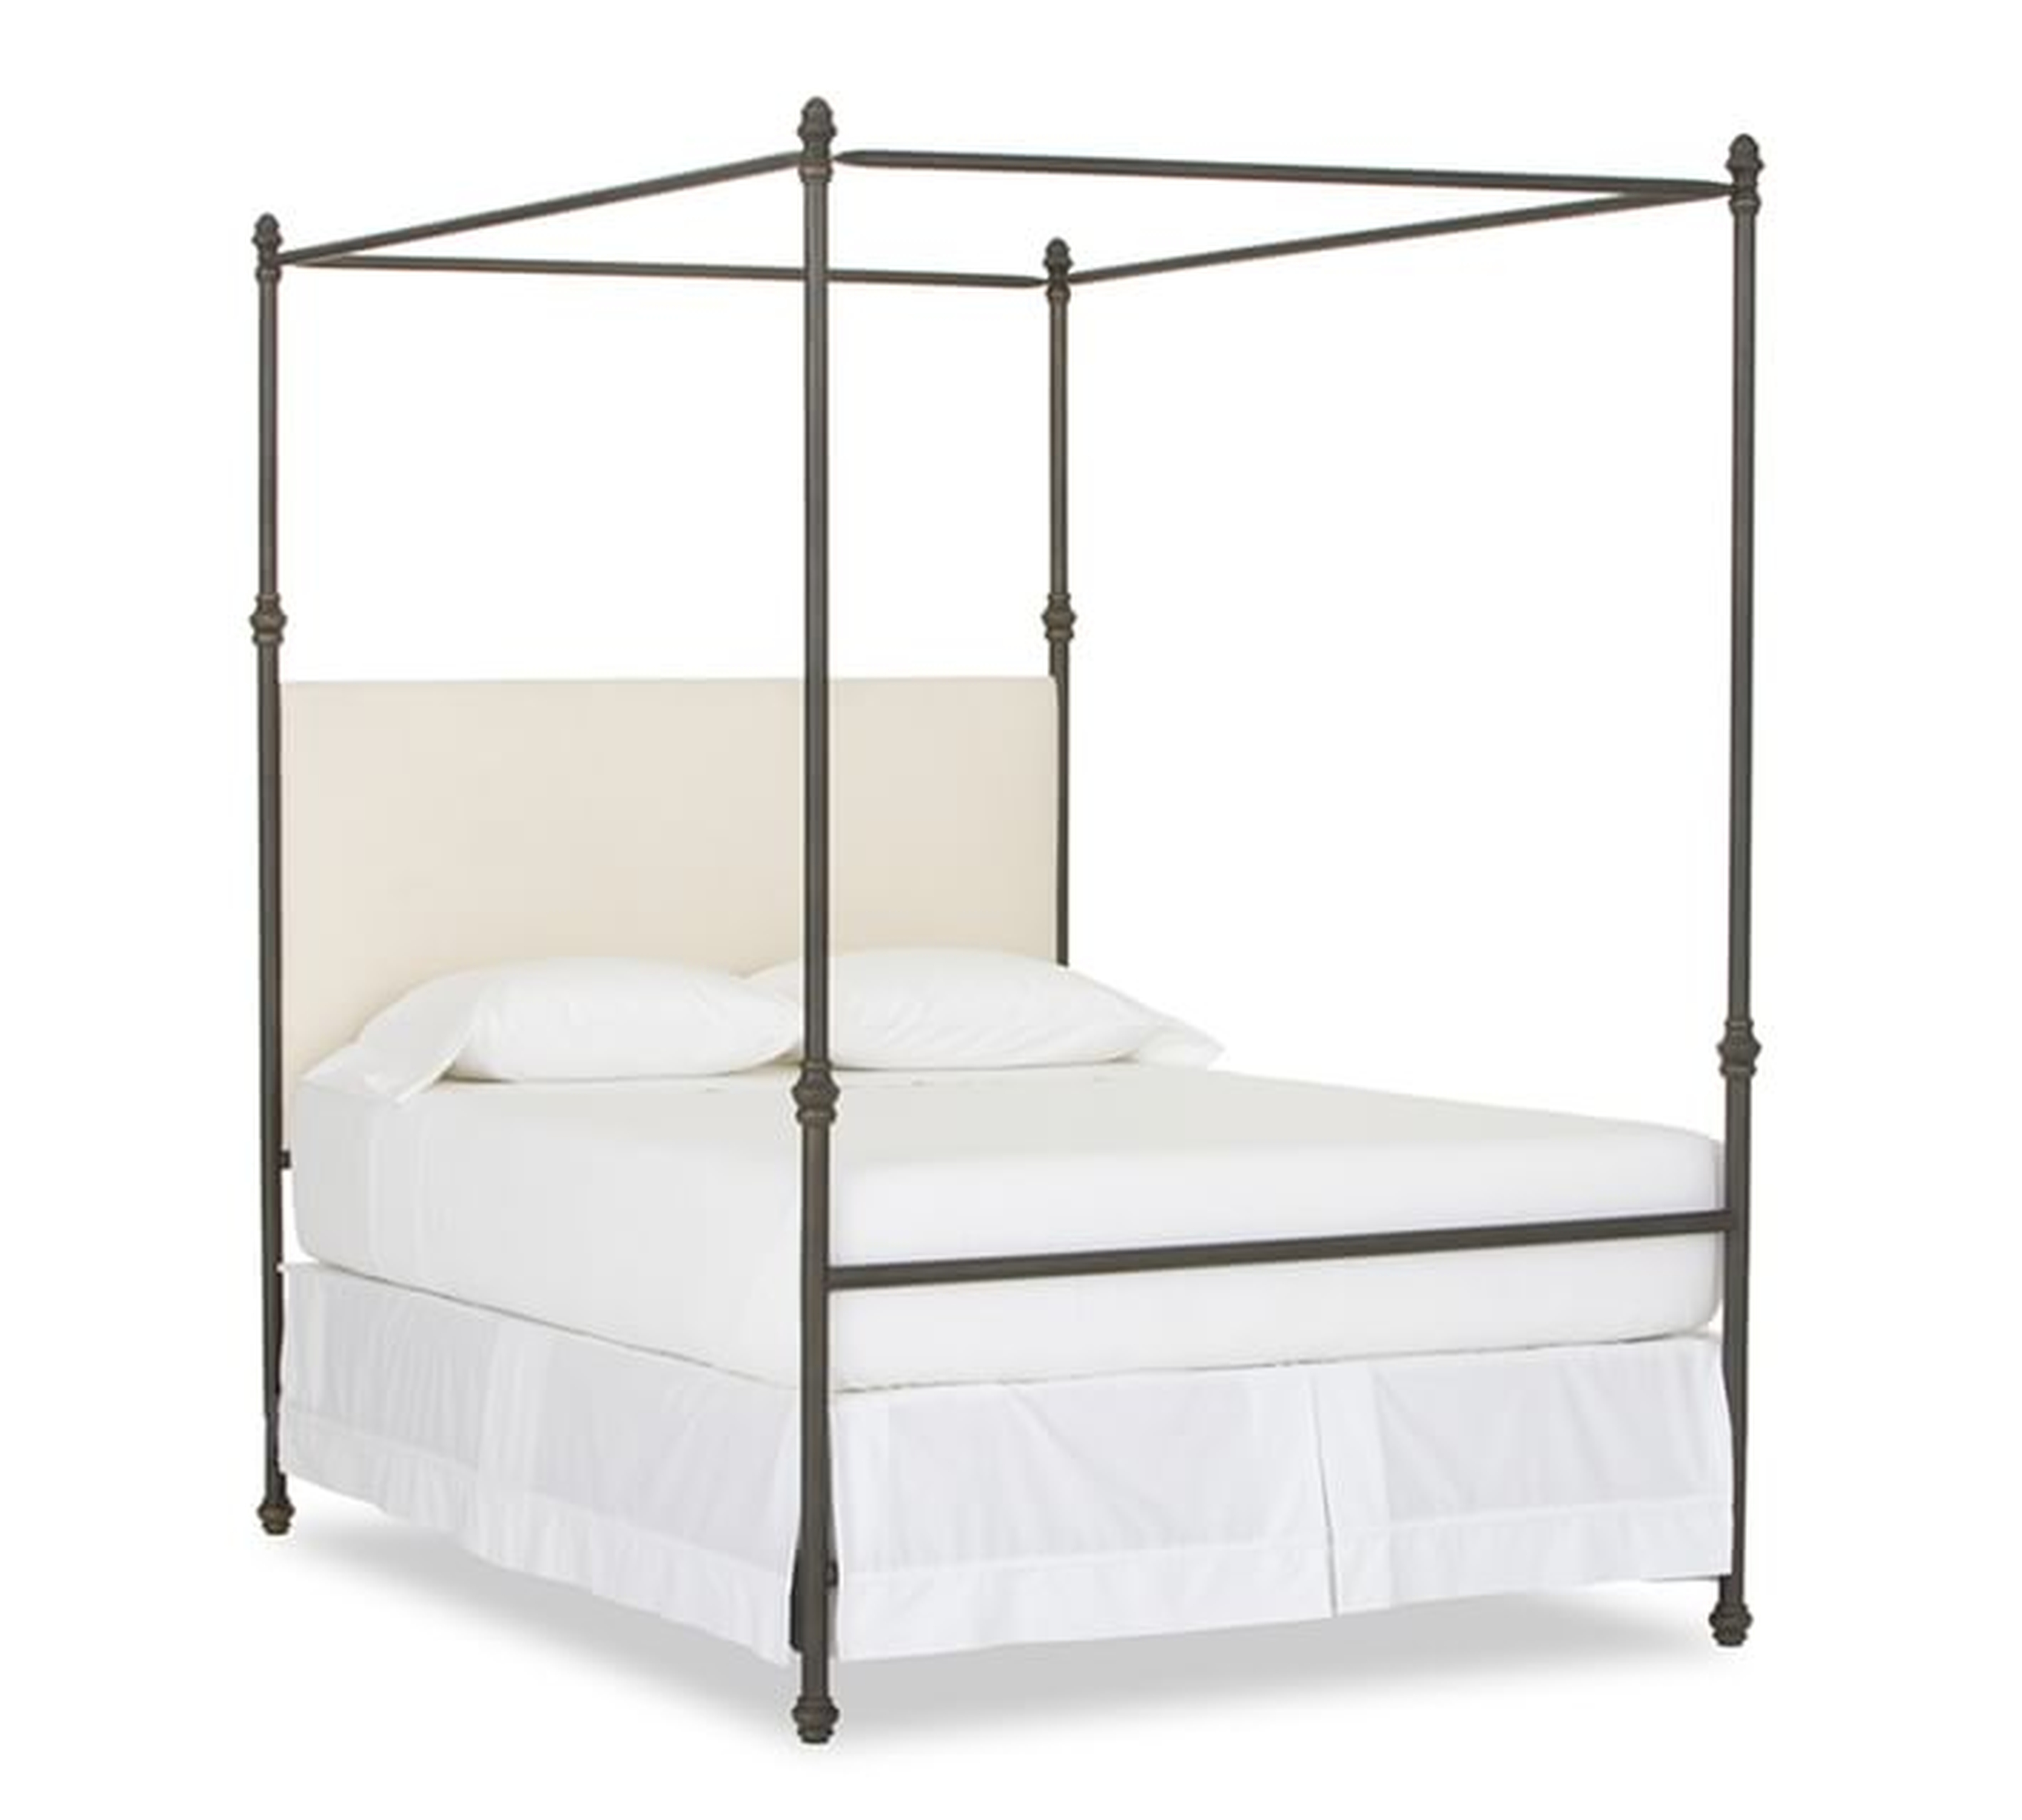 Antonia Metal Canopy Bed, Cal. King, Aged Bronze finish - Pottery Barn